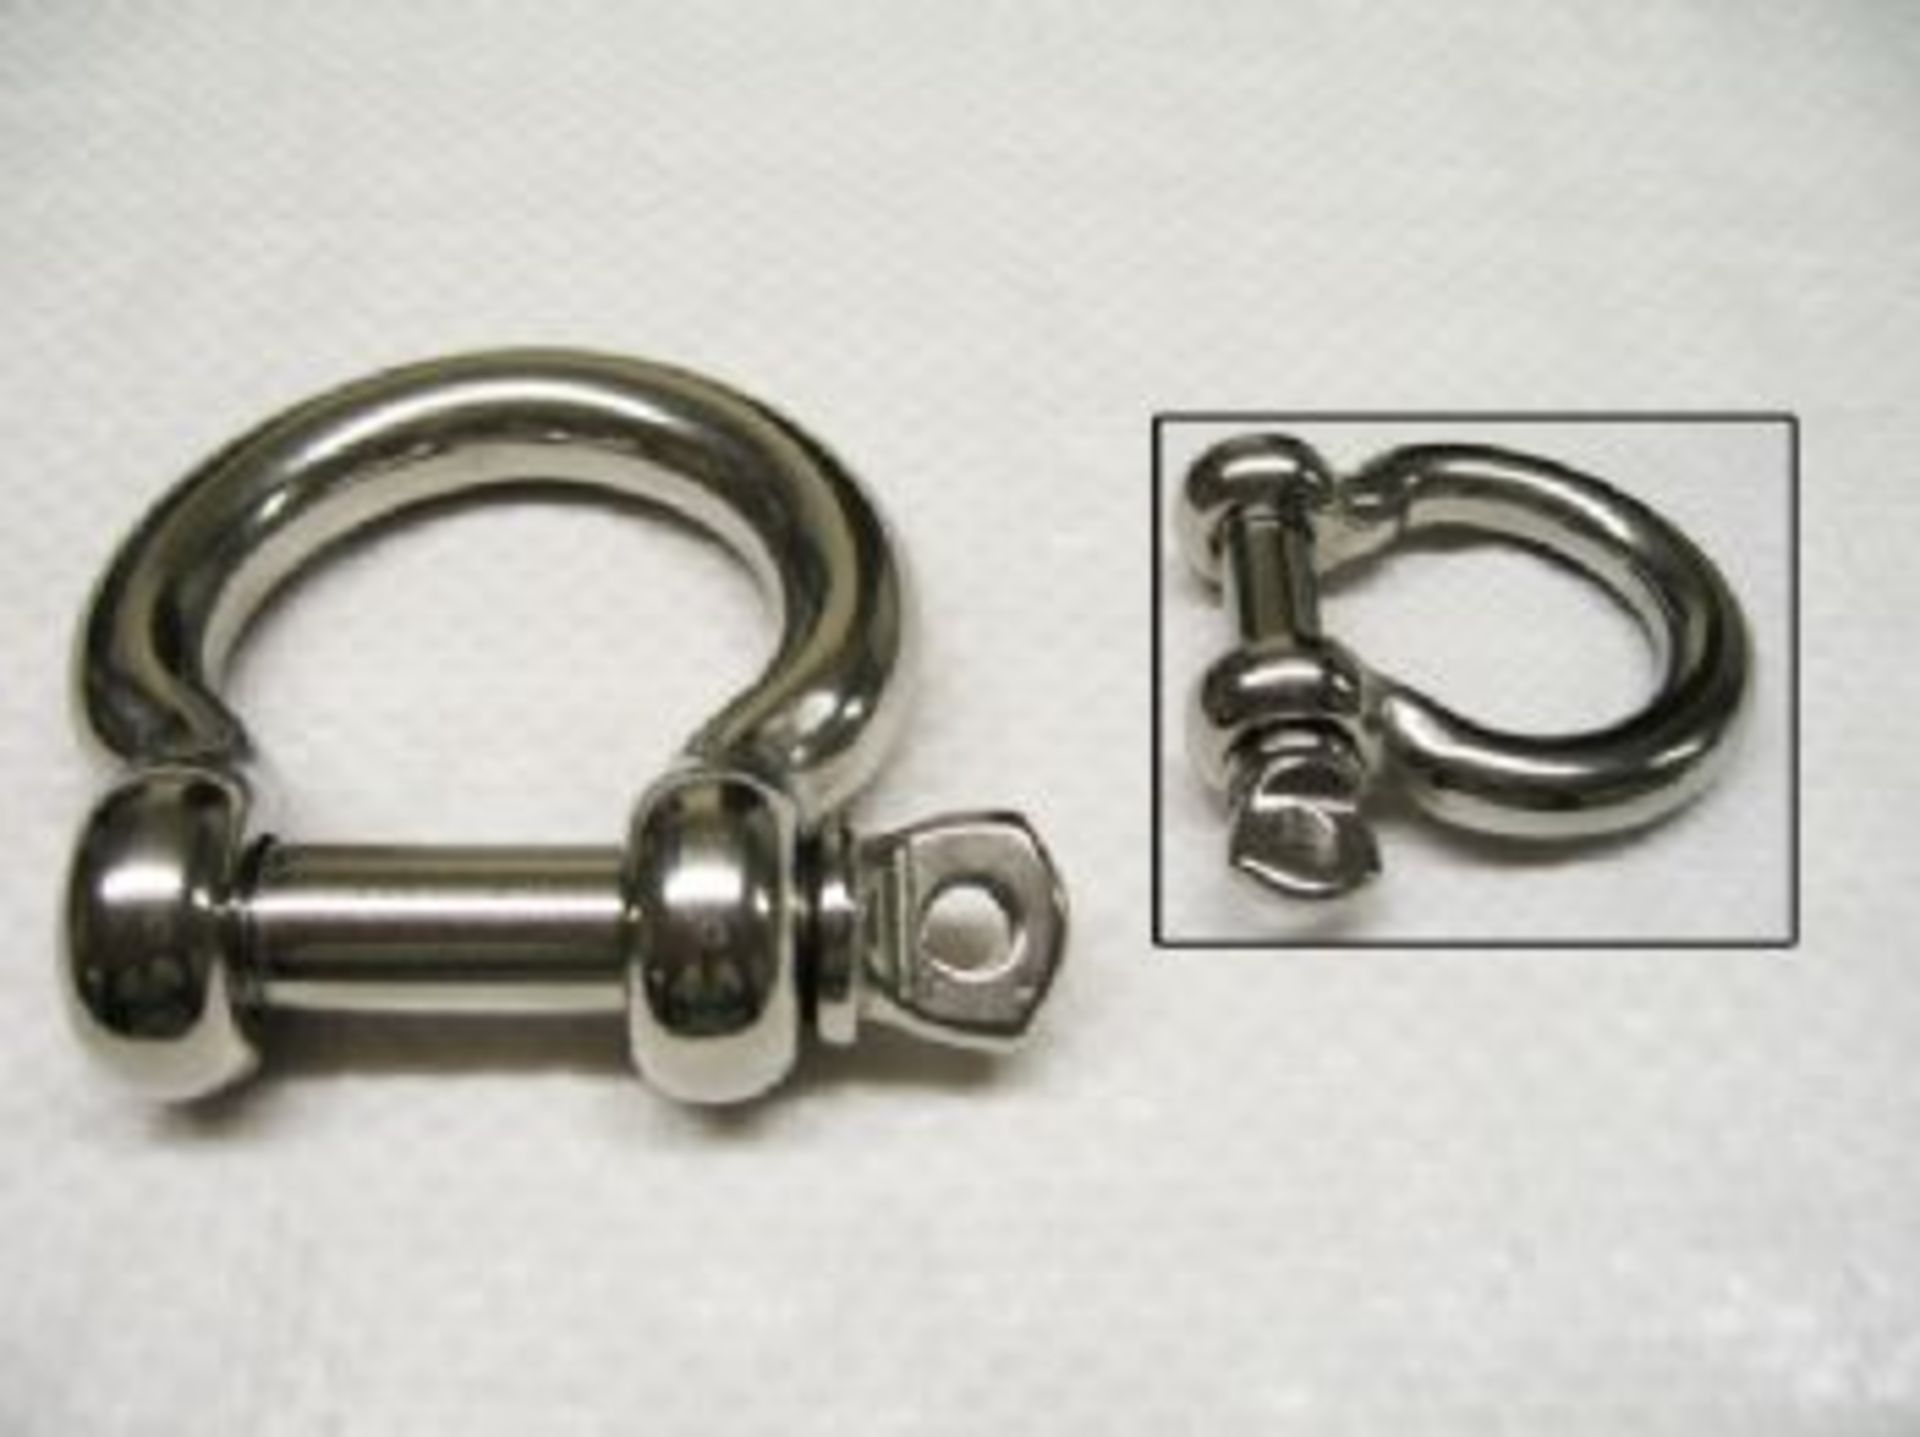 50PCS X 12MM STAINLESS STEEL Bow Shackle With Screw Collar Pin - BRAND NEW
Shackle And Pin DIA -